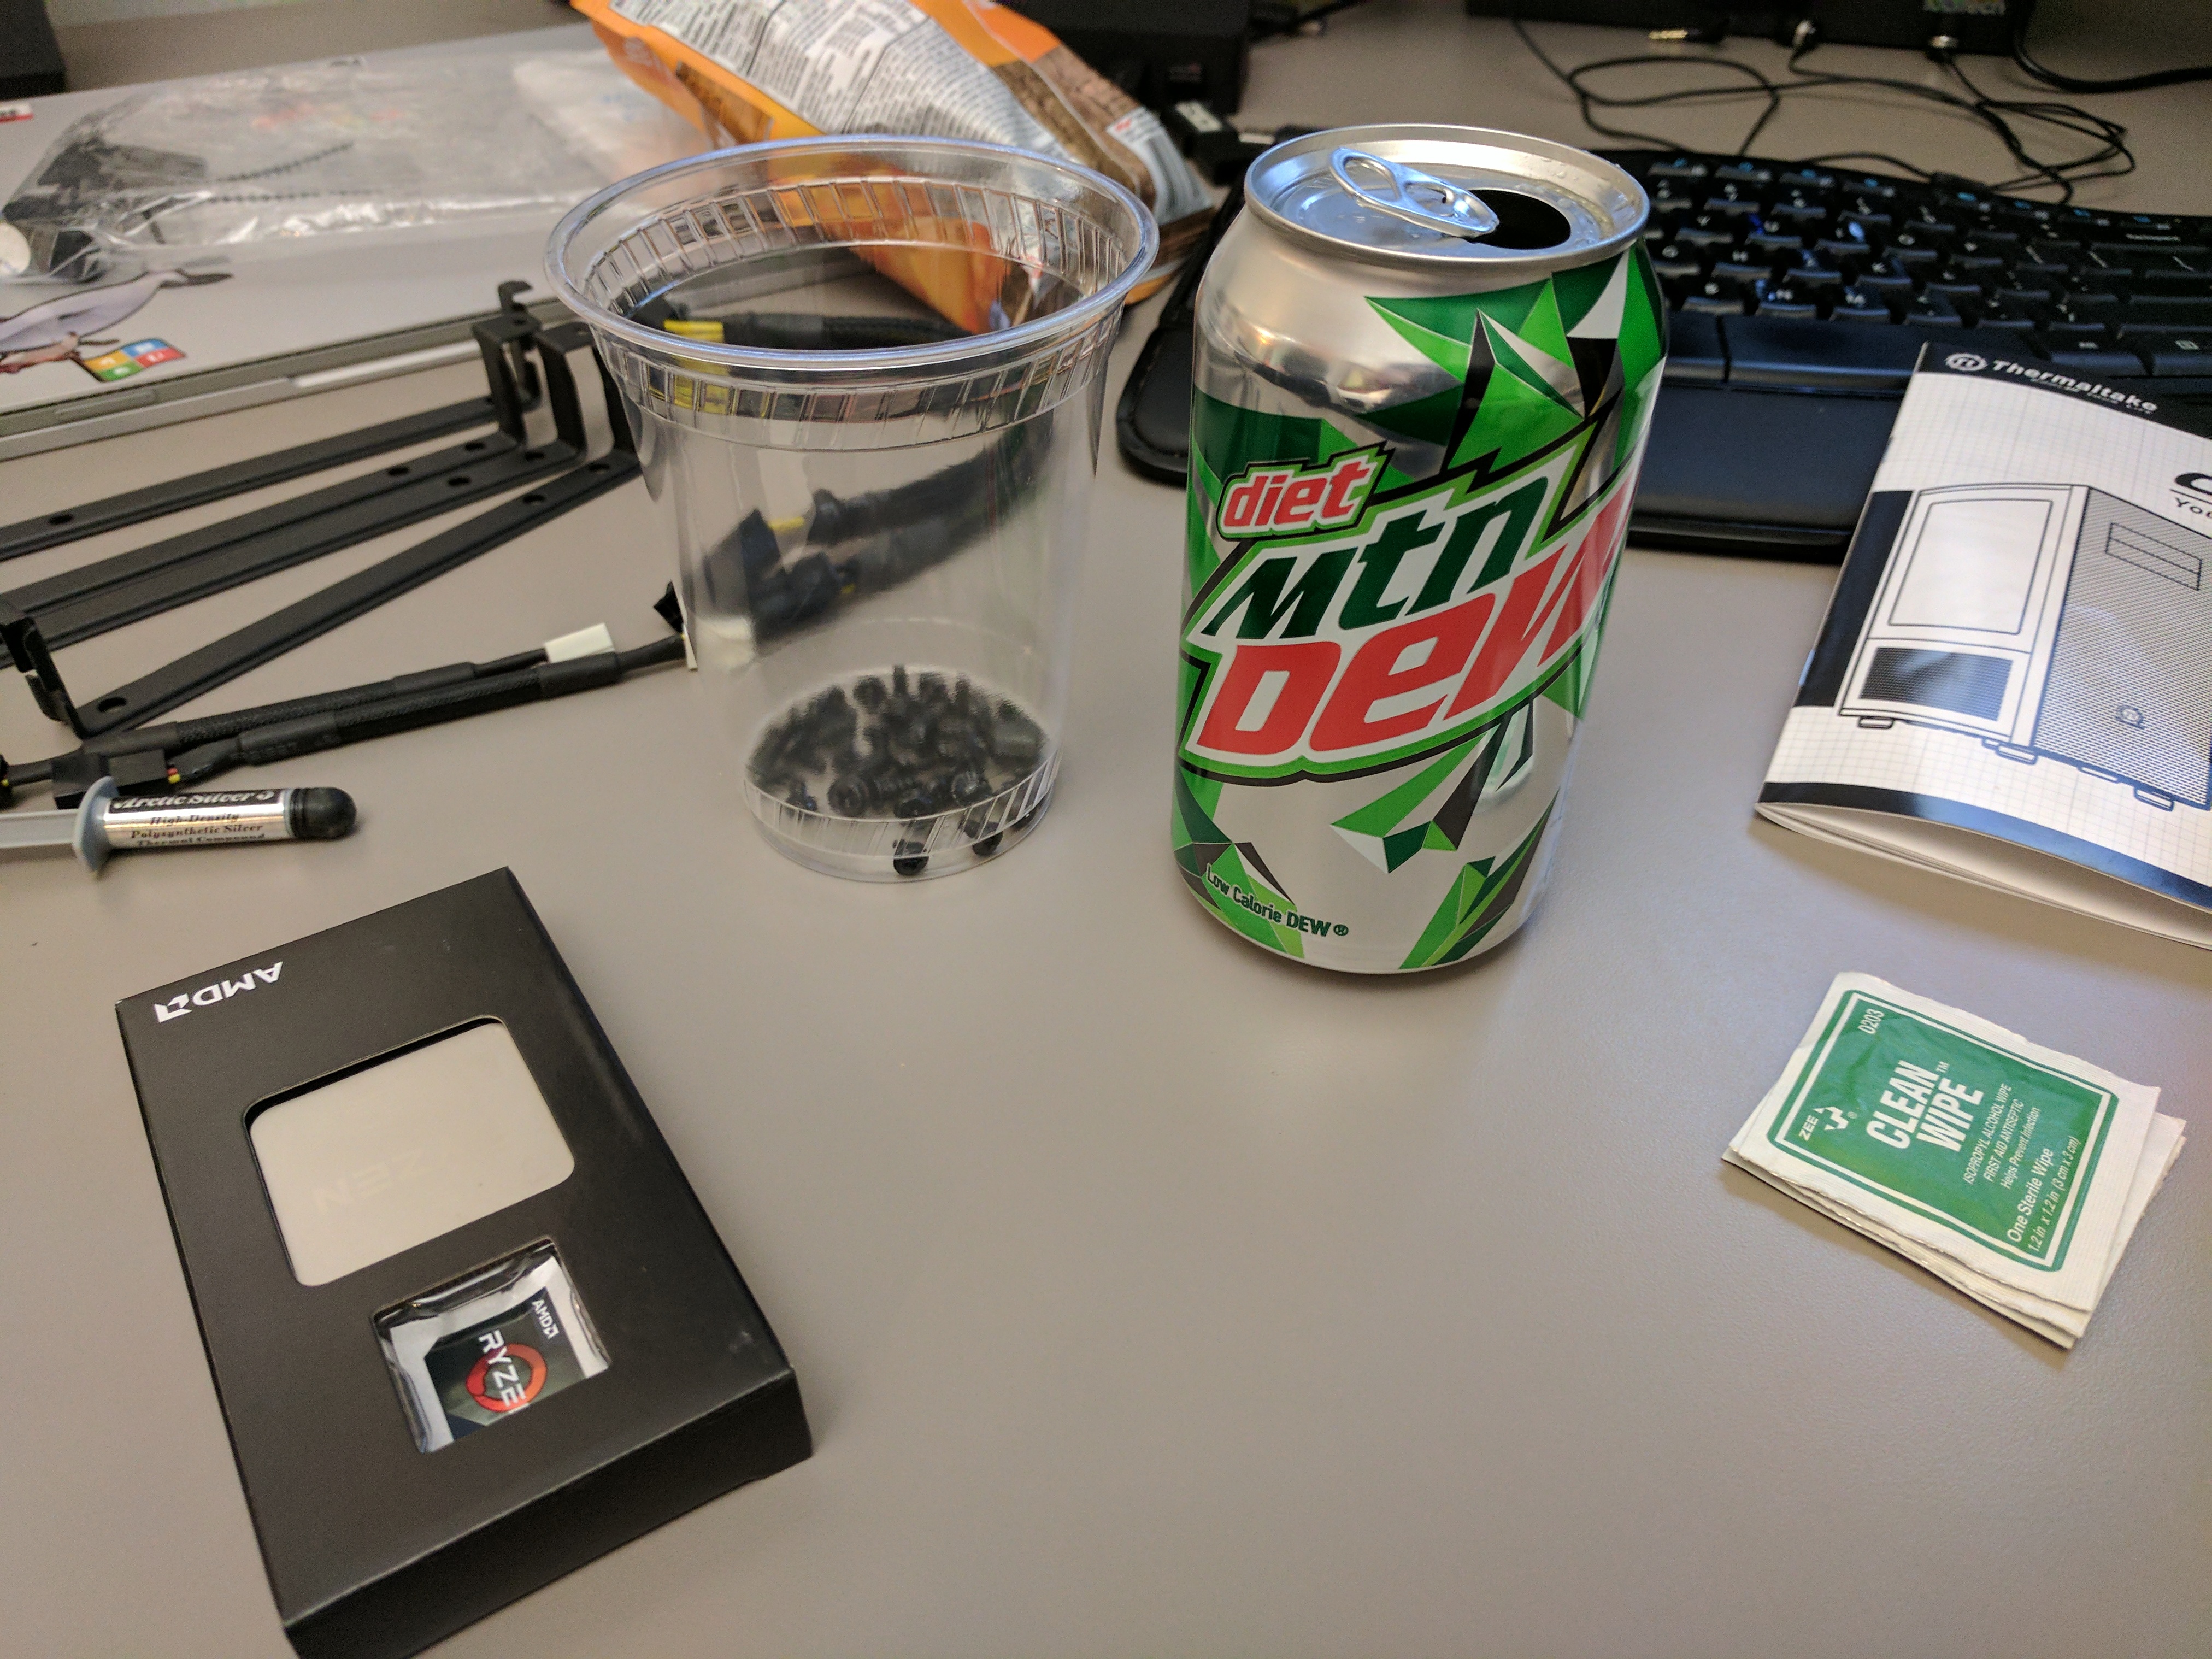 What’s a PC build without a little Mountain Dew? And a CPU! 